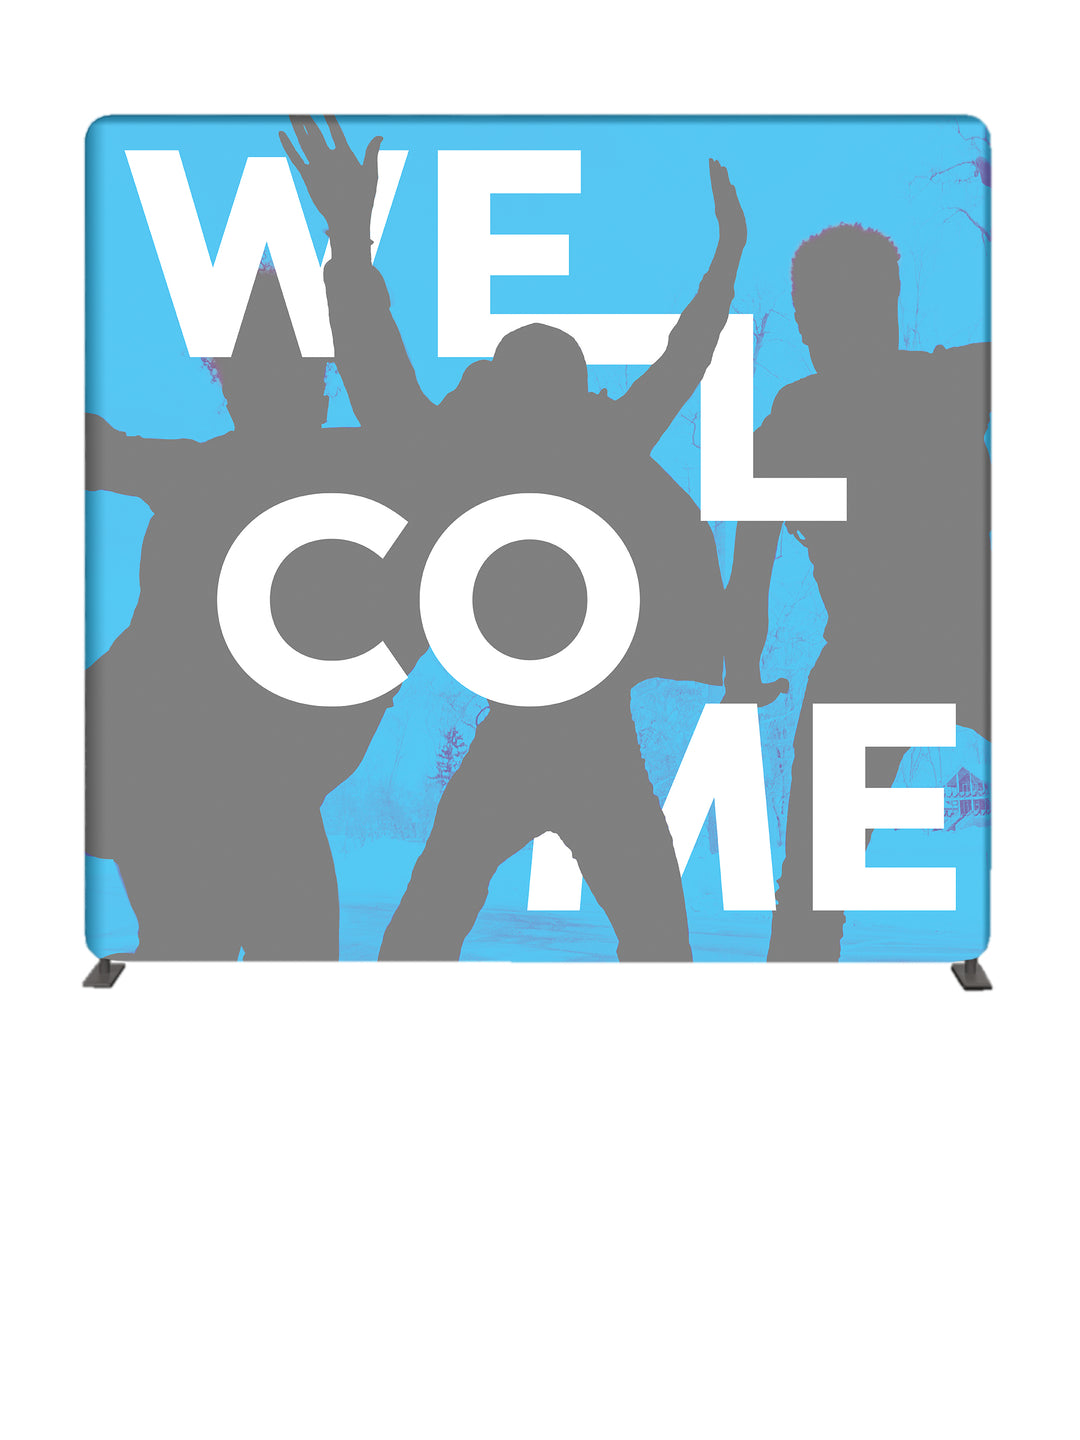 Custom Church 8 ft. Tube Display Backdrop Set Community of Faith featuring community worshipers jumping for joy to welcome visitors. Customize with images of members of your community.